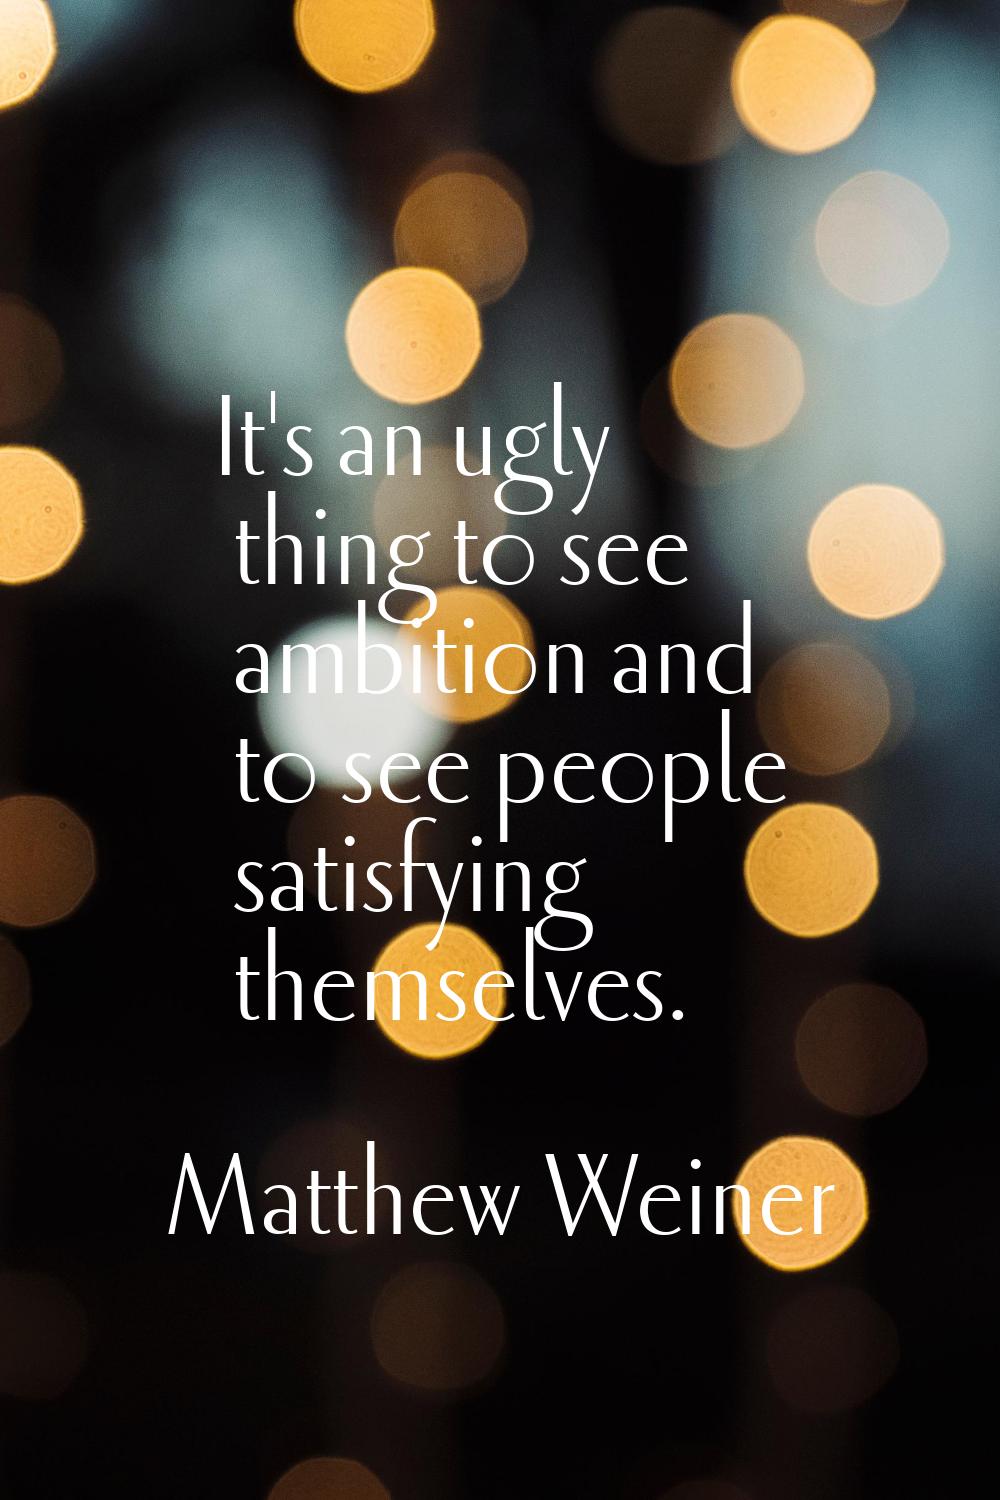 It's an ugly thing to see ambition and to see people satisfying themselves.